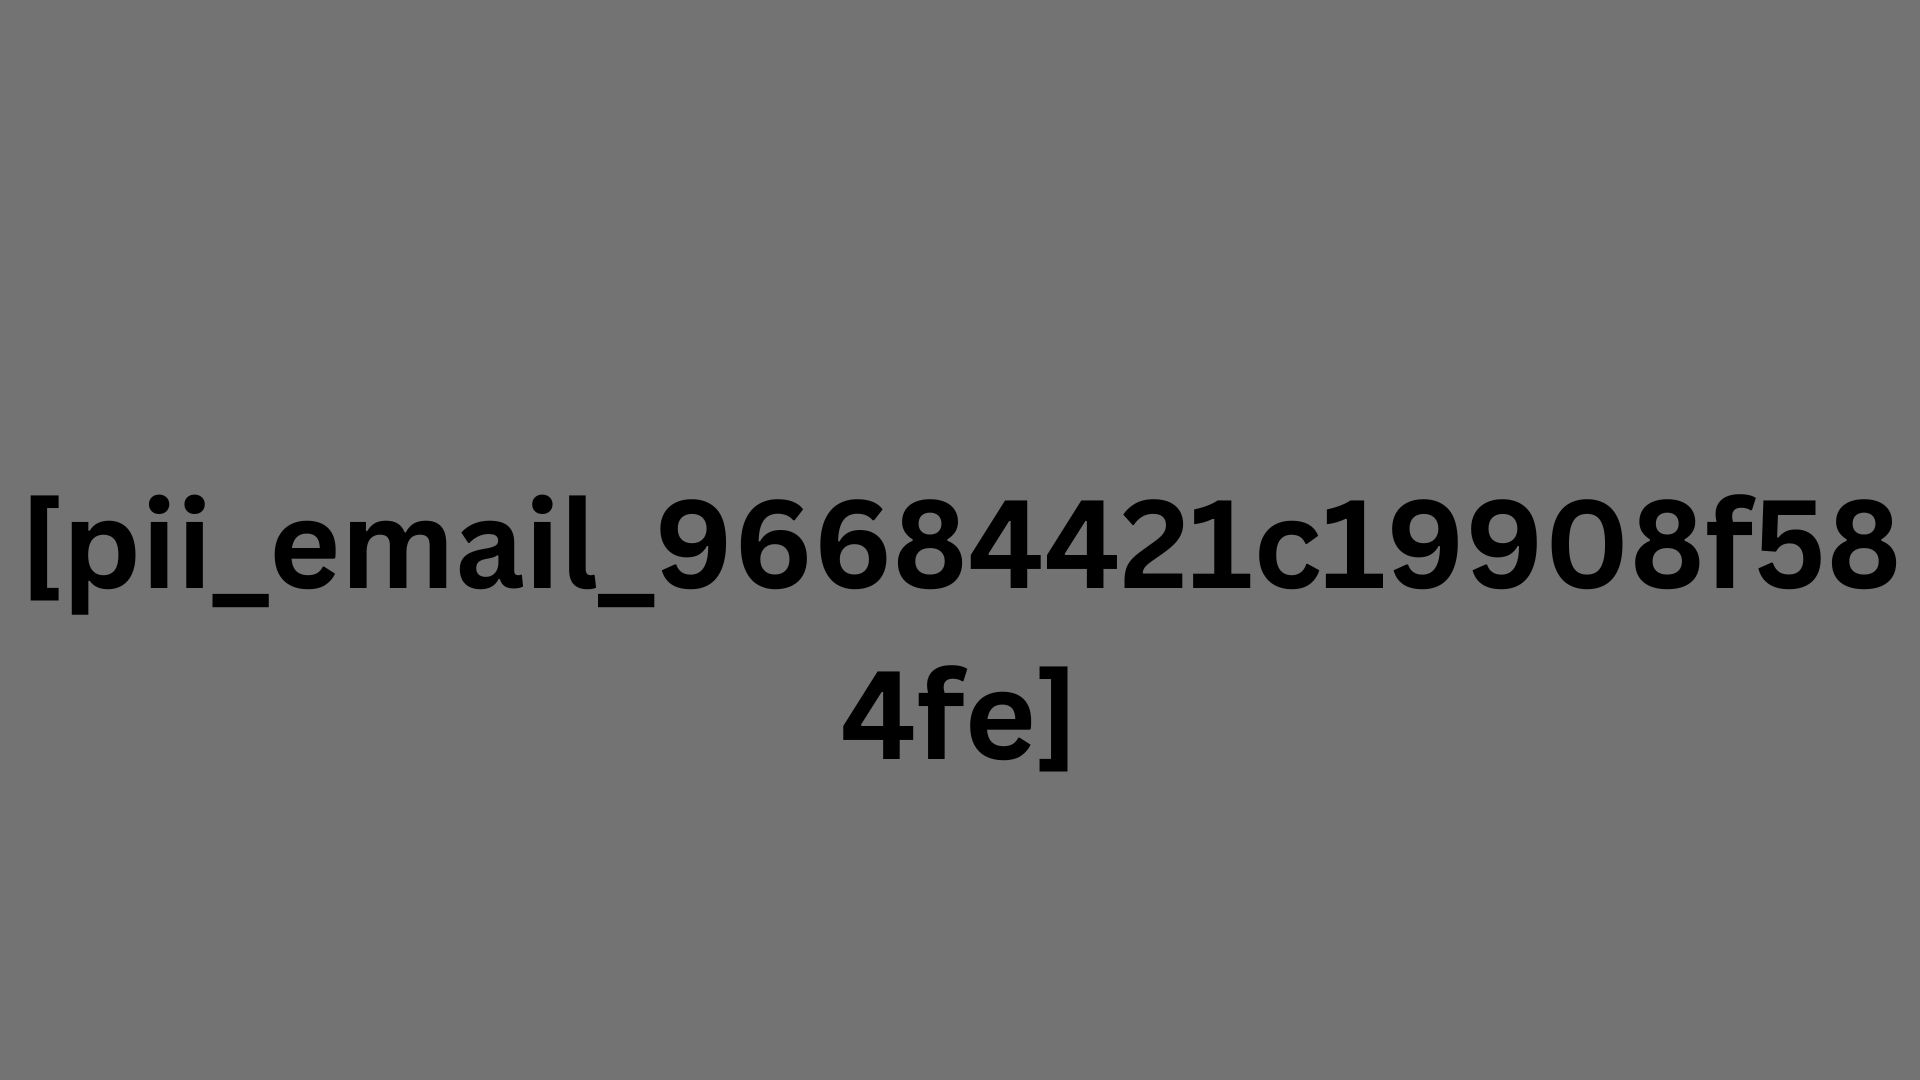 How to Solve [pii_email_96684421c19908f584fe] Error Code